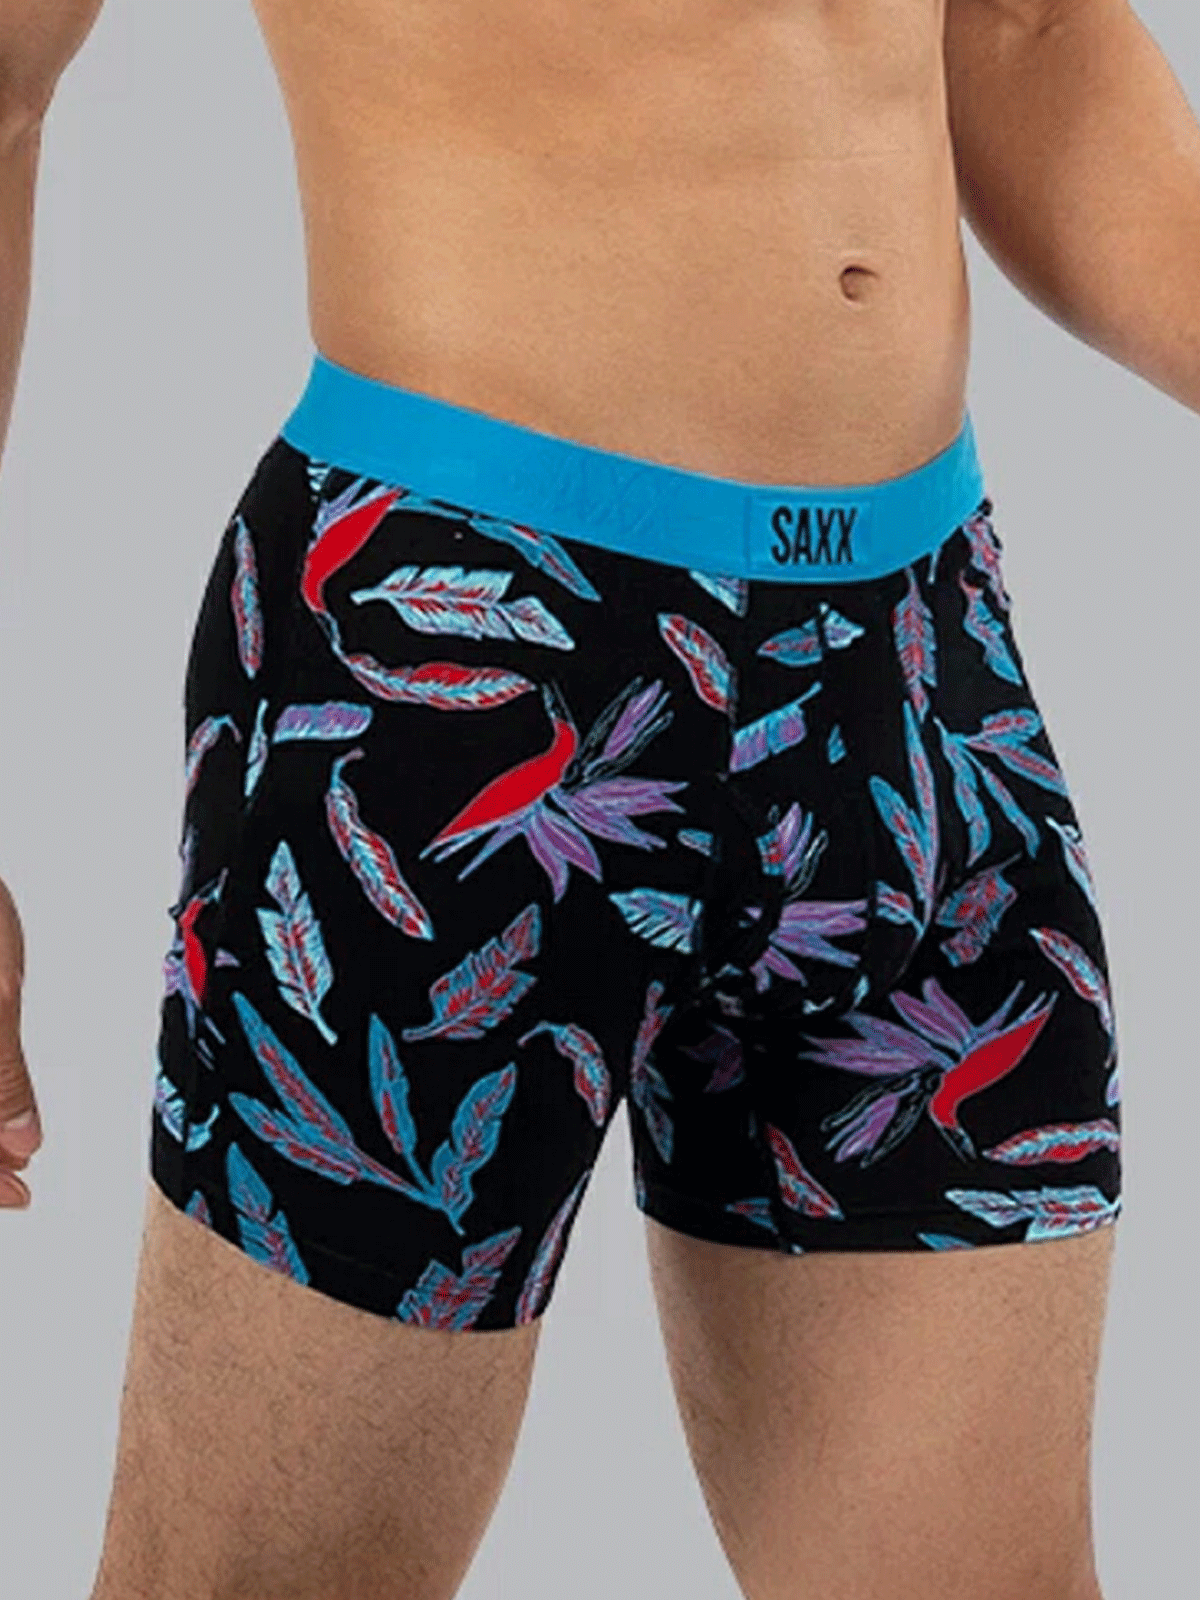 https://redbird.pl/eng_pl_Mens-comfortable-SAXX-ULTRA-Boxer-Brief-Fly-with-tropical-bird-leaf-print-black-63191_3.png